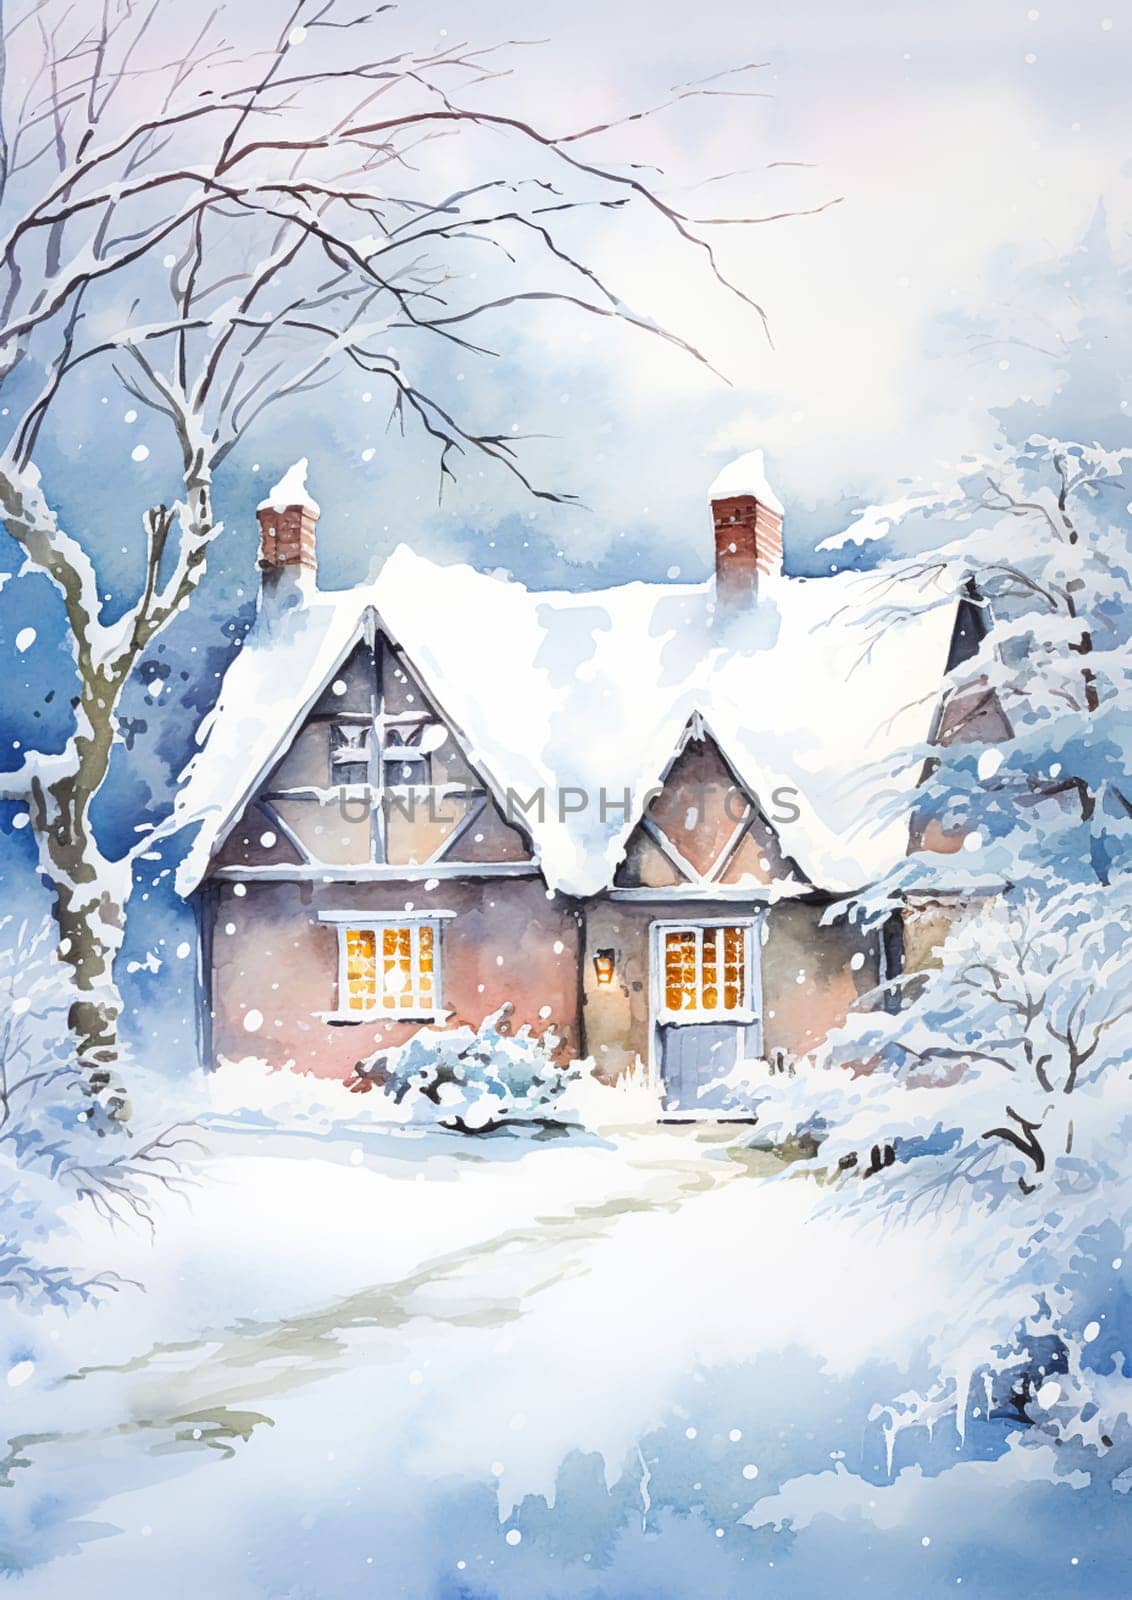 Merry Christmas and Happy Holidays, watercolour printable art print, English countryside cottage as snow winter holiday Christmas card, thank you and diy greeting card design, country style idea